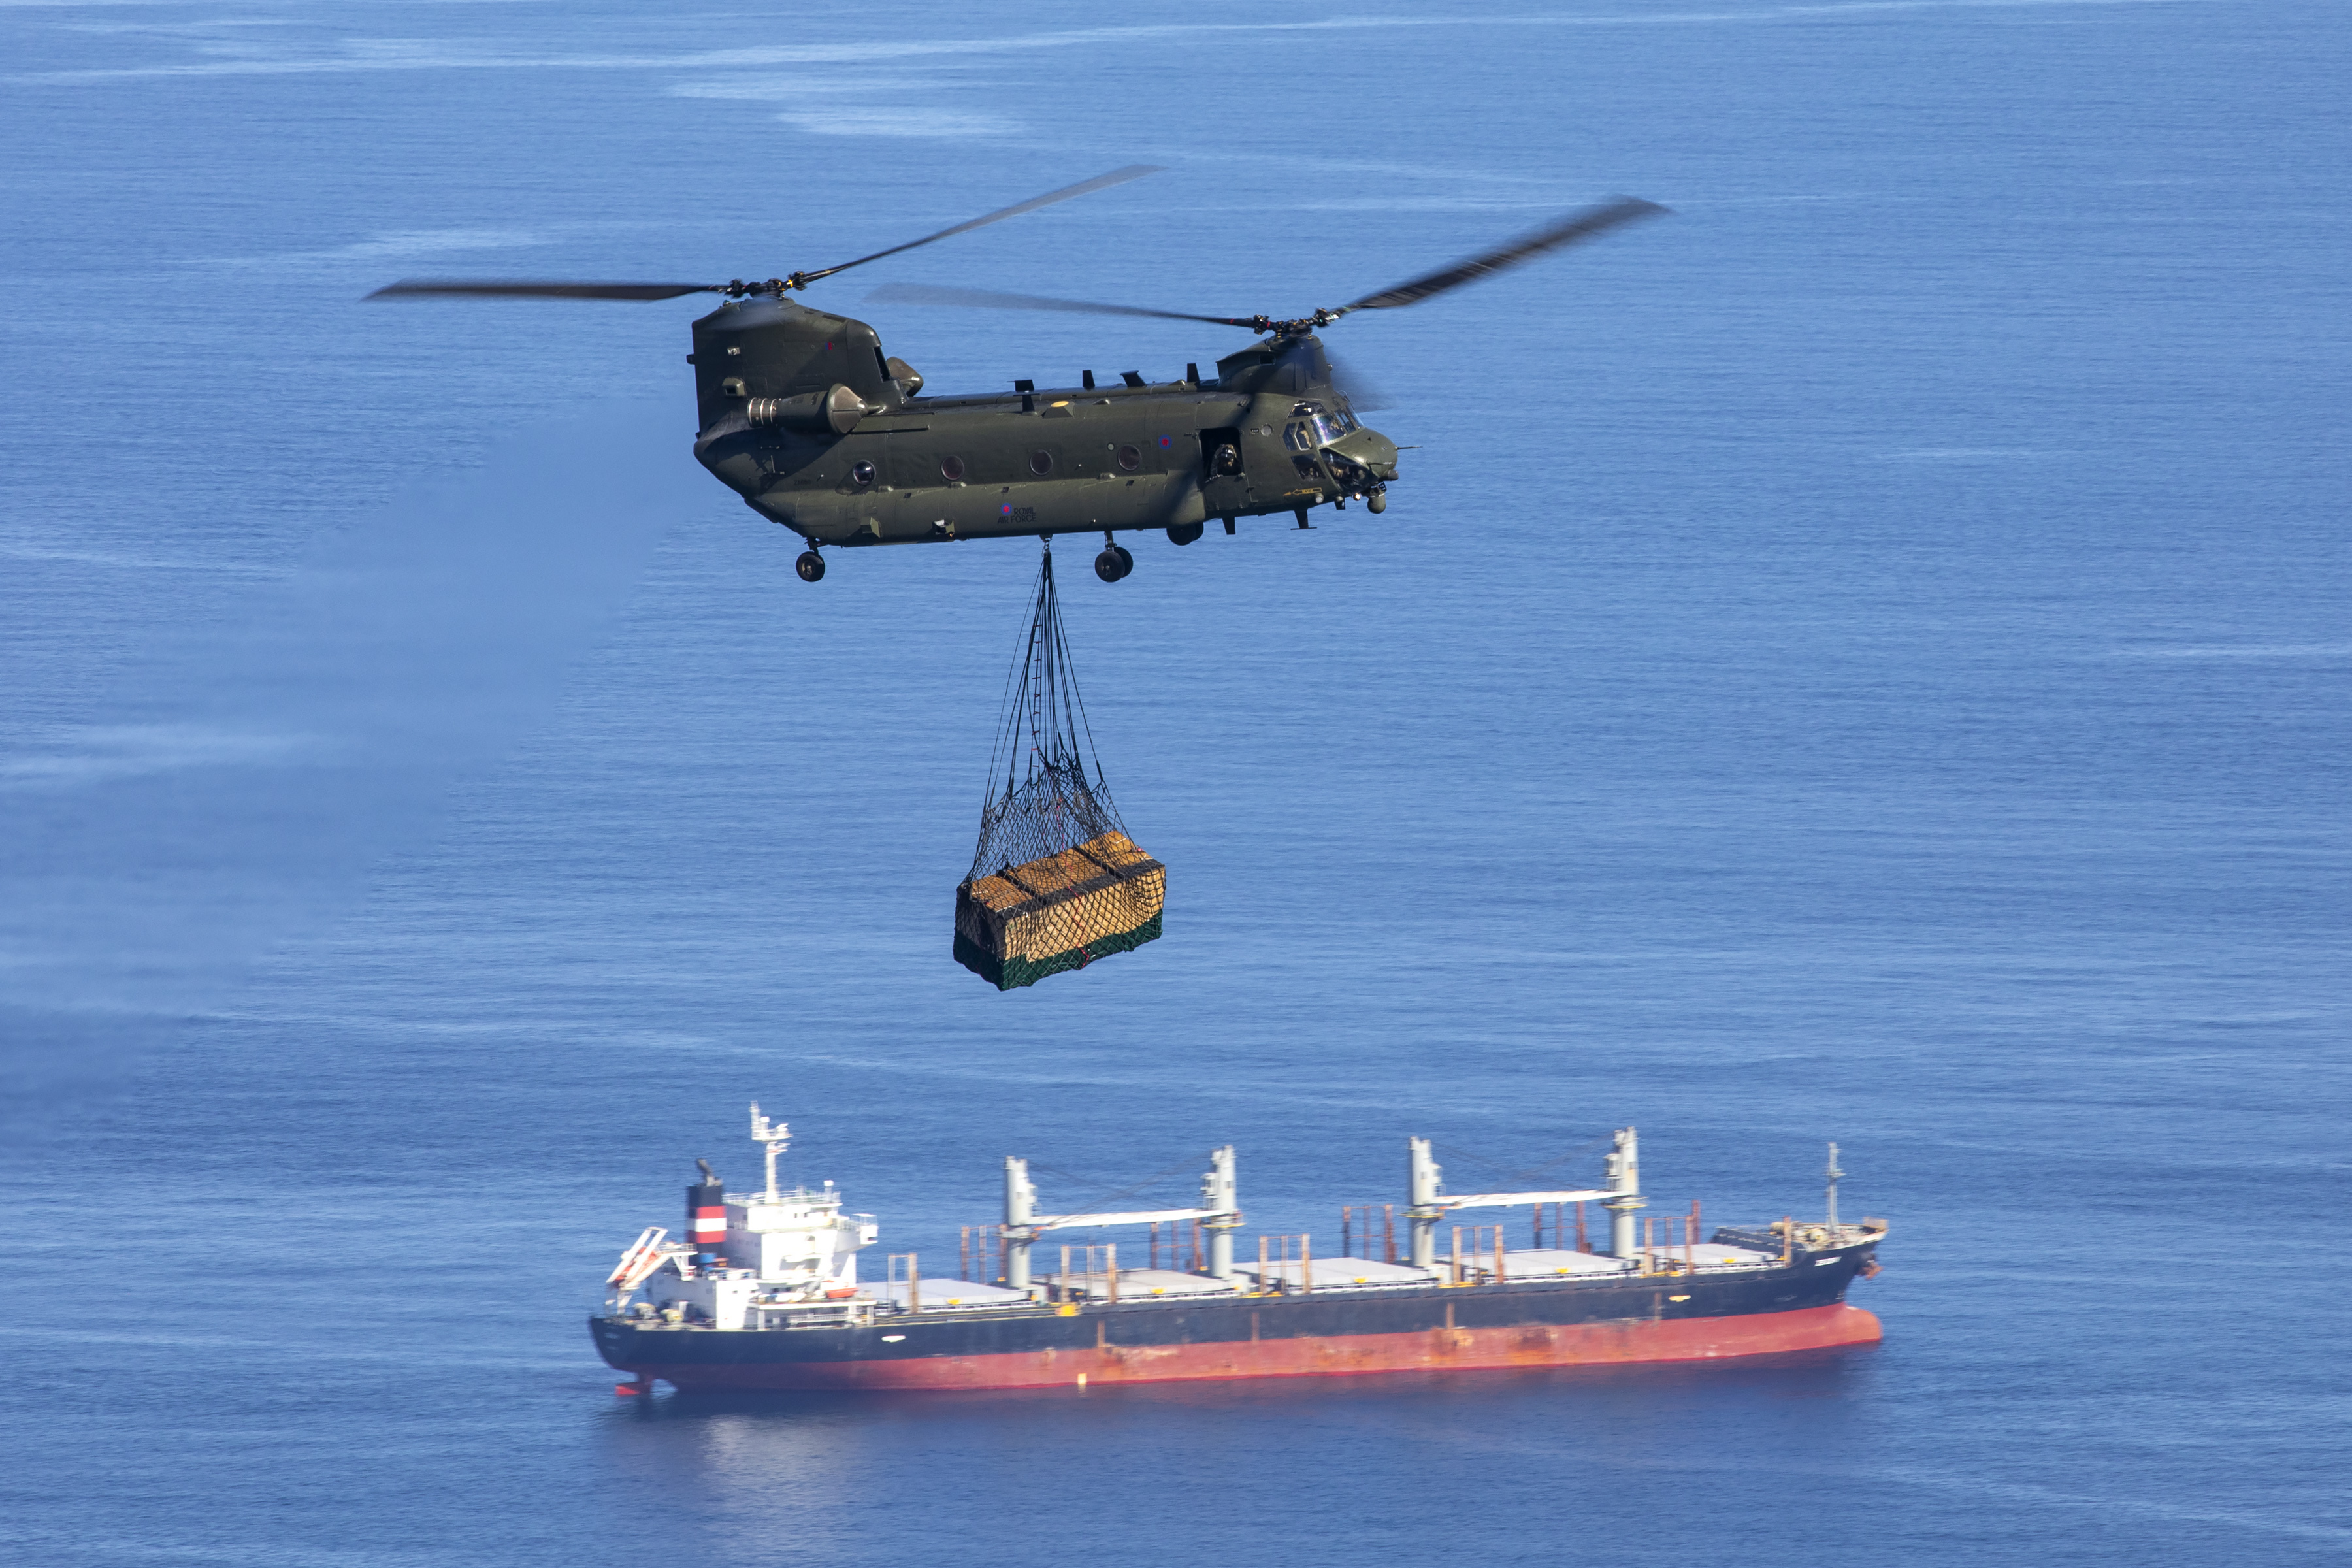 Chinook carries loaded sling over cargo ship.